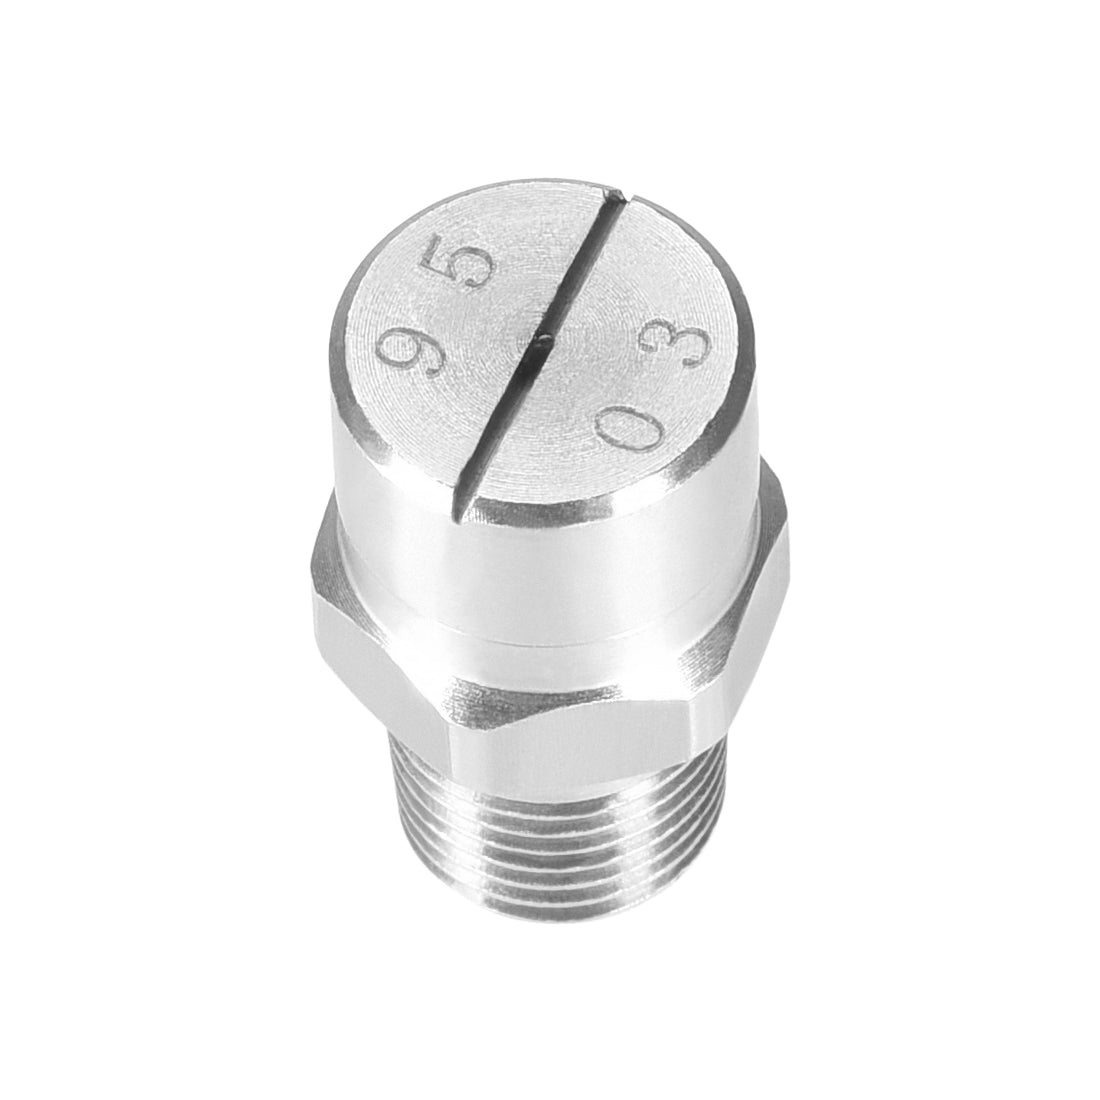 Uxcell Uxcell Flat Fan Spray Tip - 1/8BSPT Male Thread 304 Stainless Steel Nozzle - 95 Degree 1.1mm Orifice Diameter